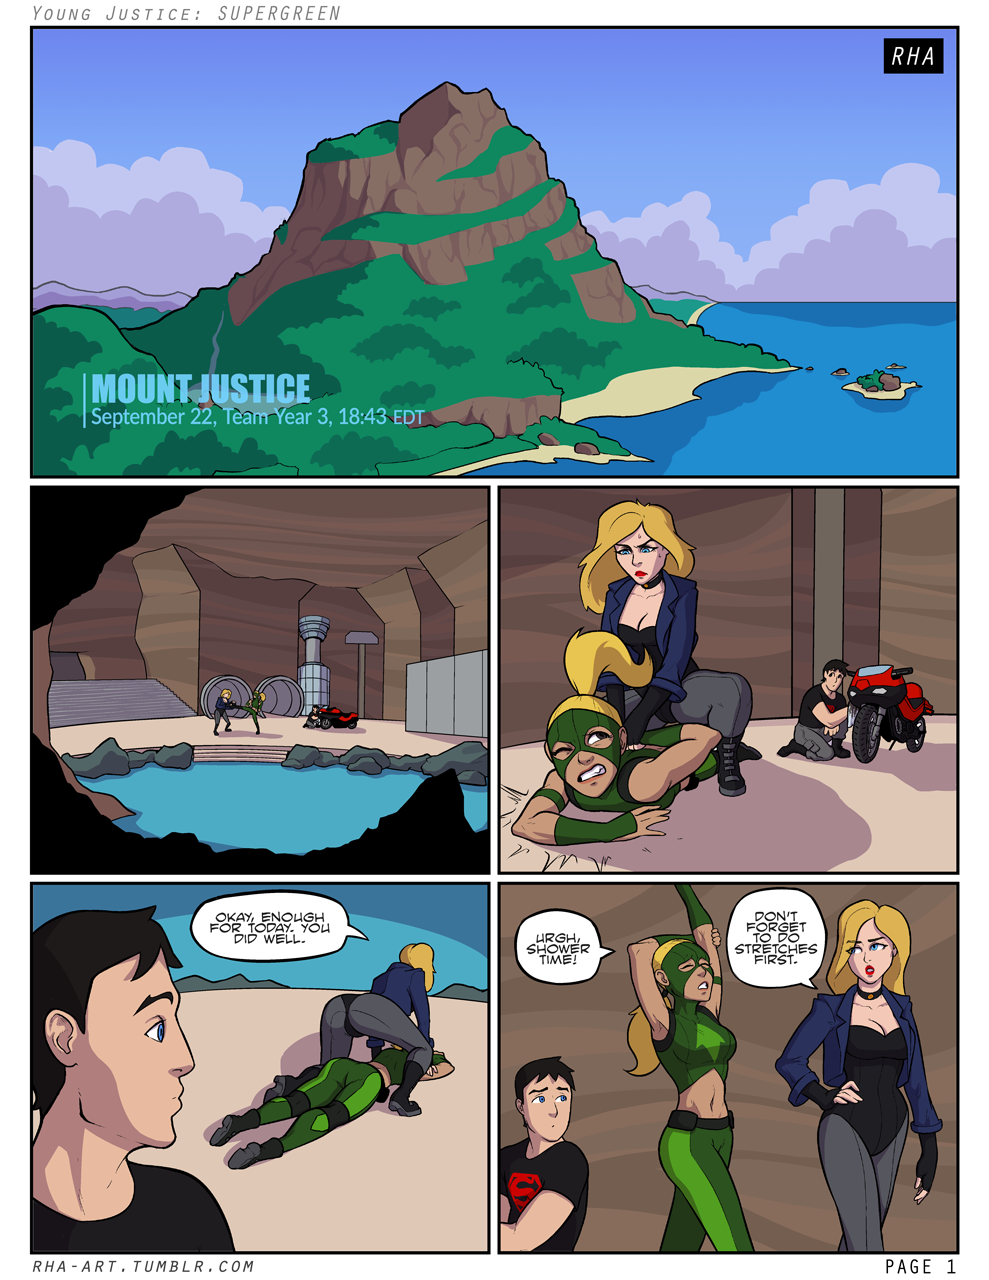 rha-art:  Young Justice: Supergreen — PAGES 00 – 07 Photoset overview:&gt;